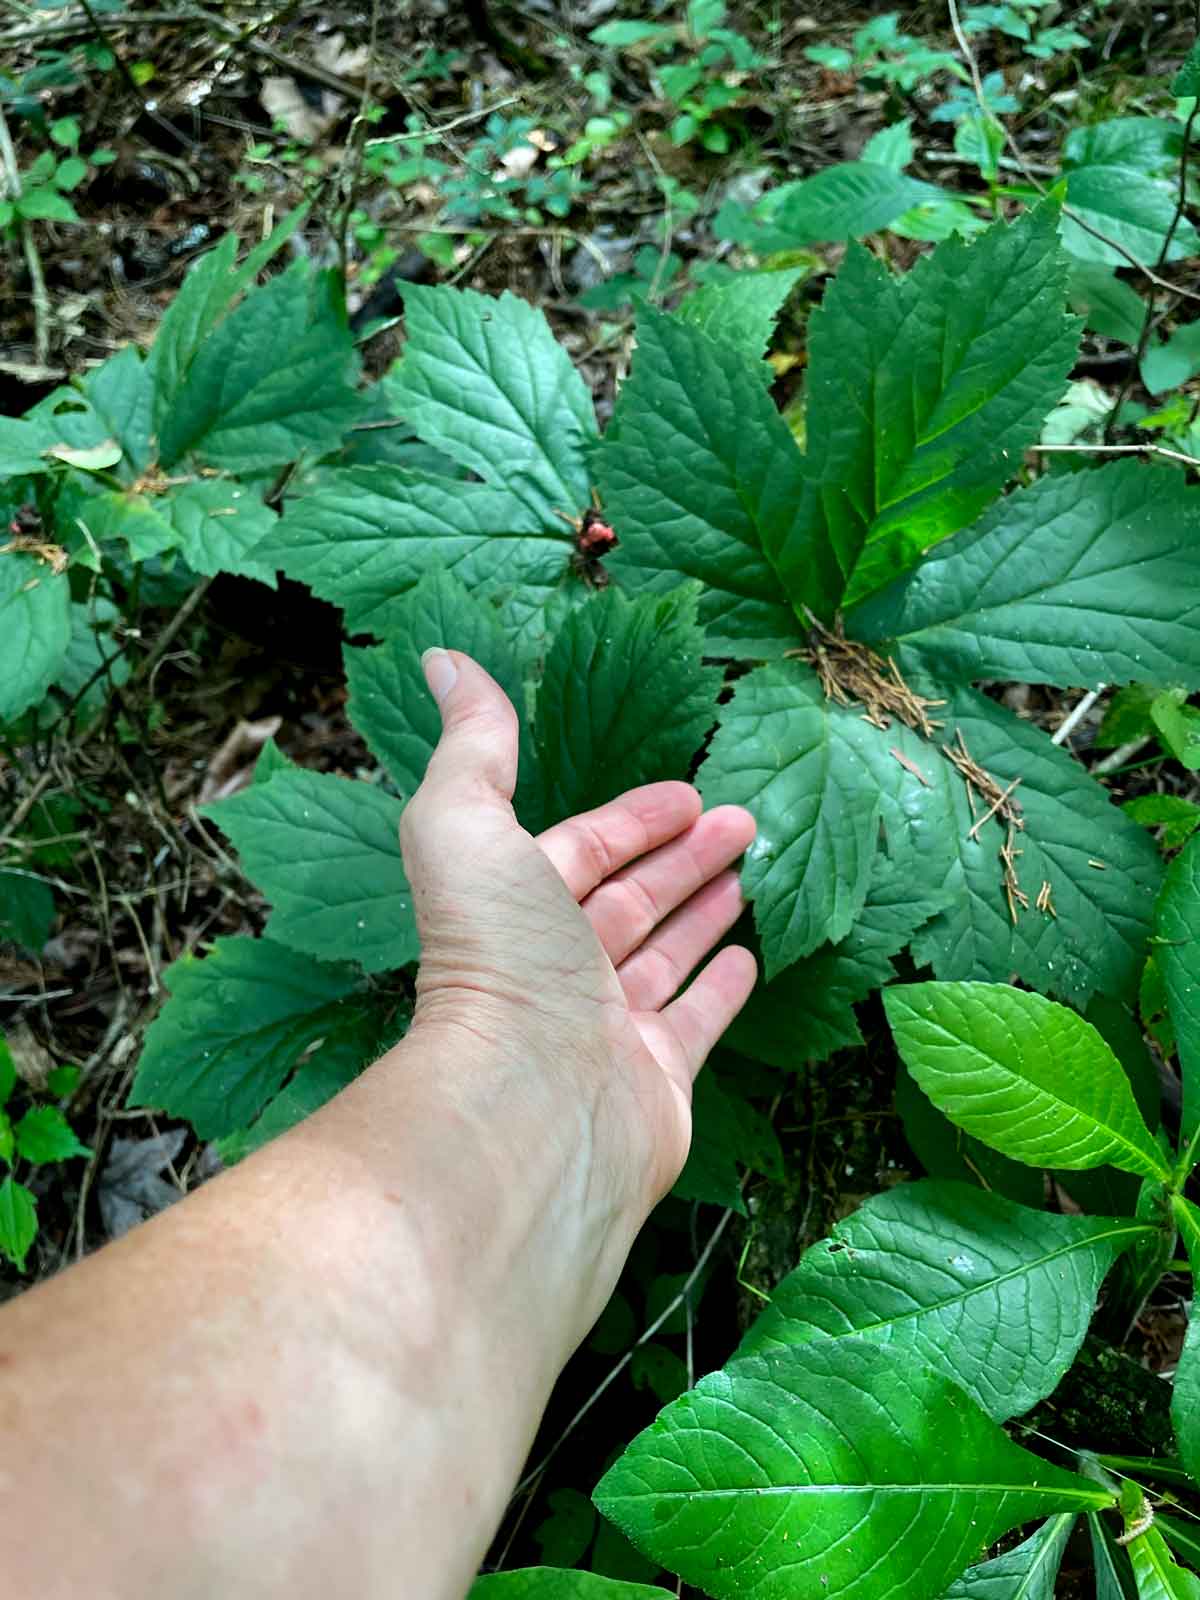 A small patch of large, probably fairly old goldenseal (Hydrastis canadensis).